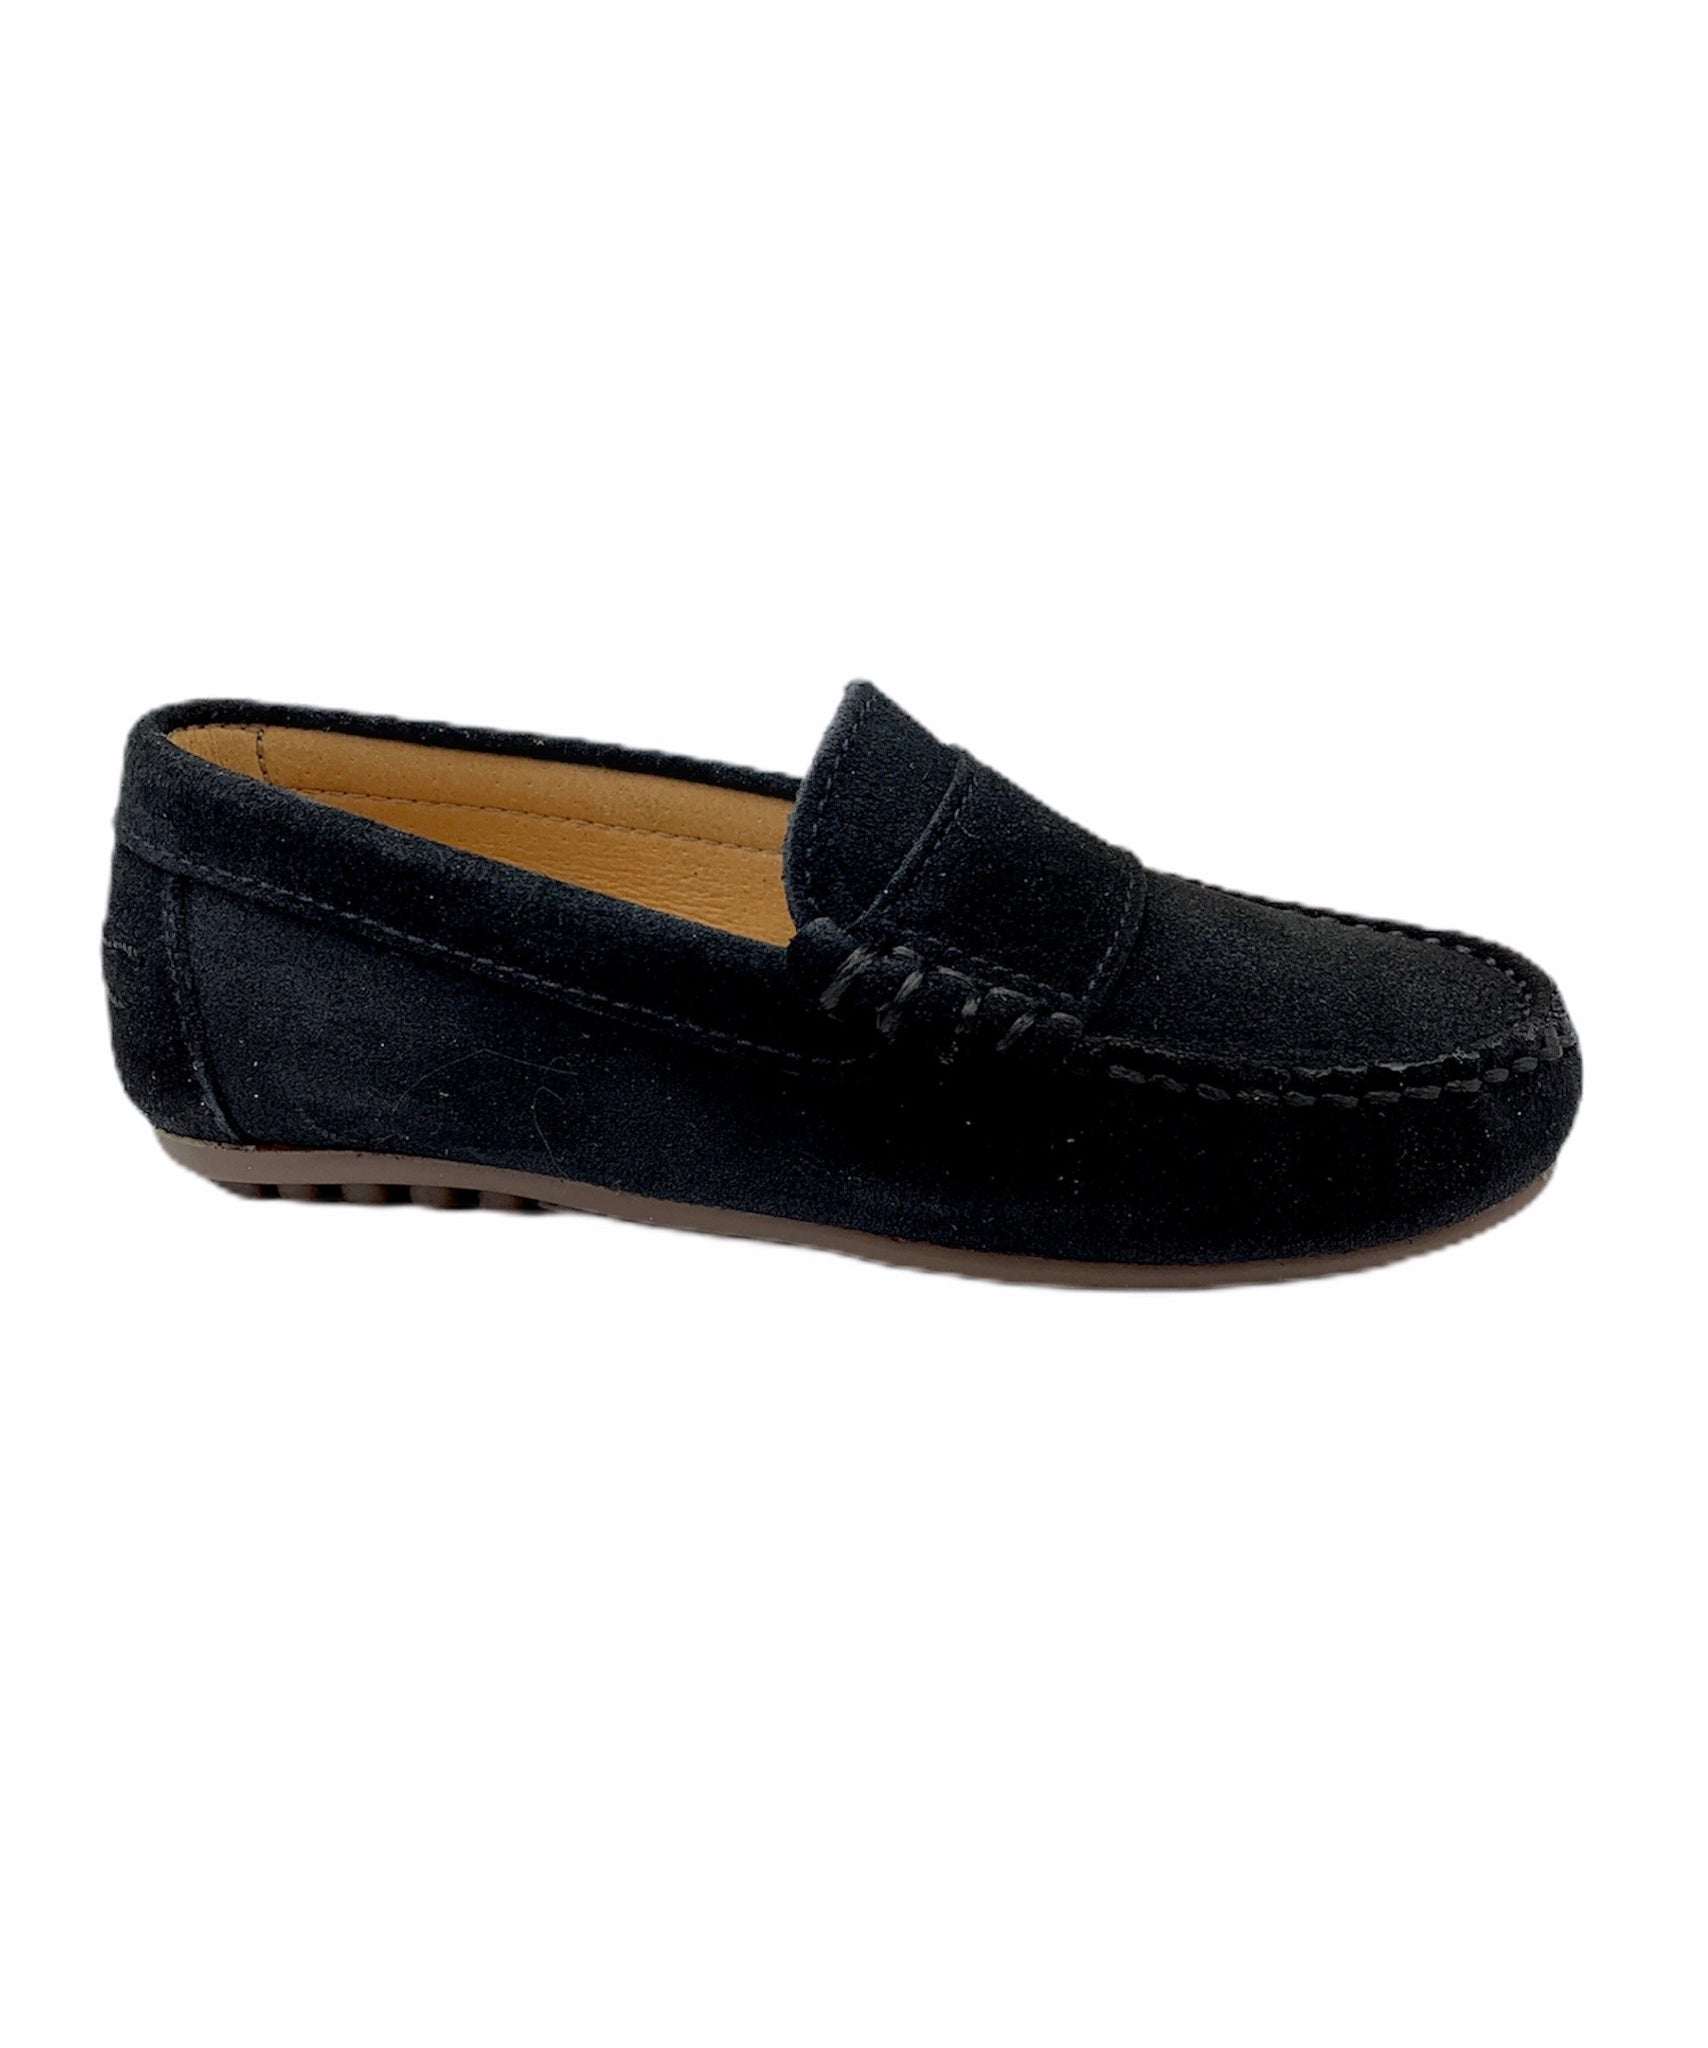 LMDI Black Suede Penny Loafer – Laced Shoe Inc